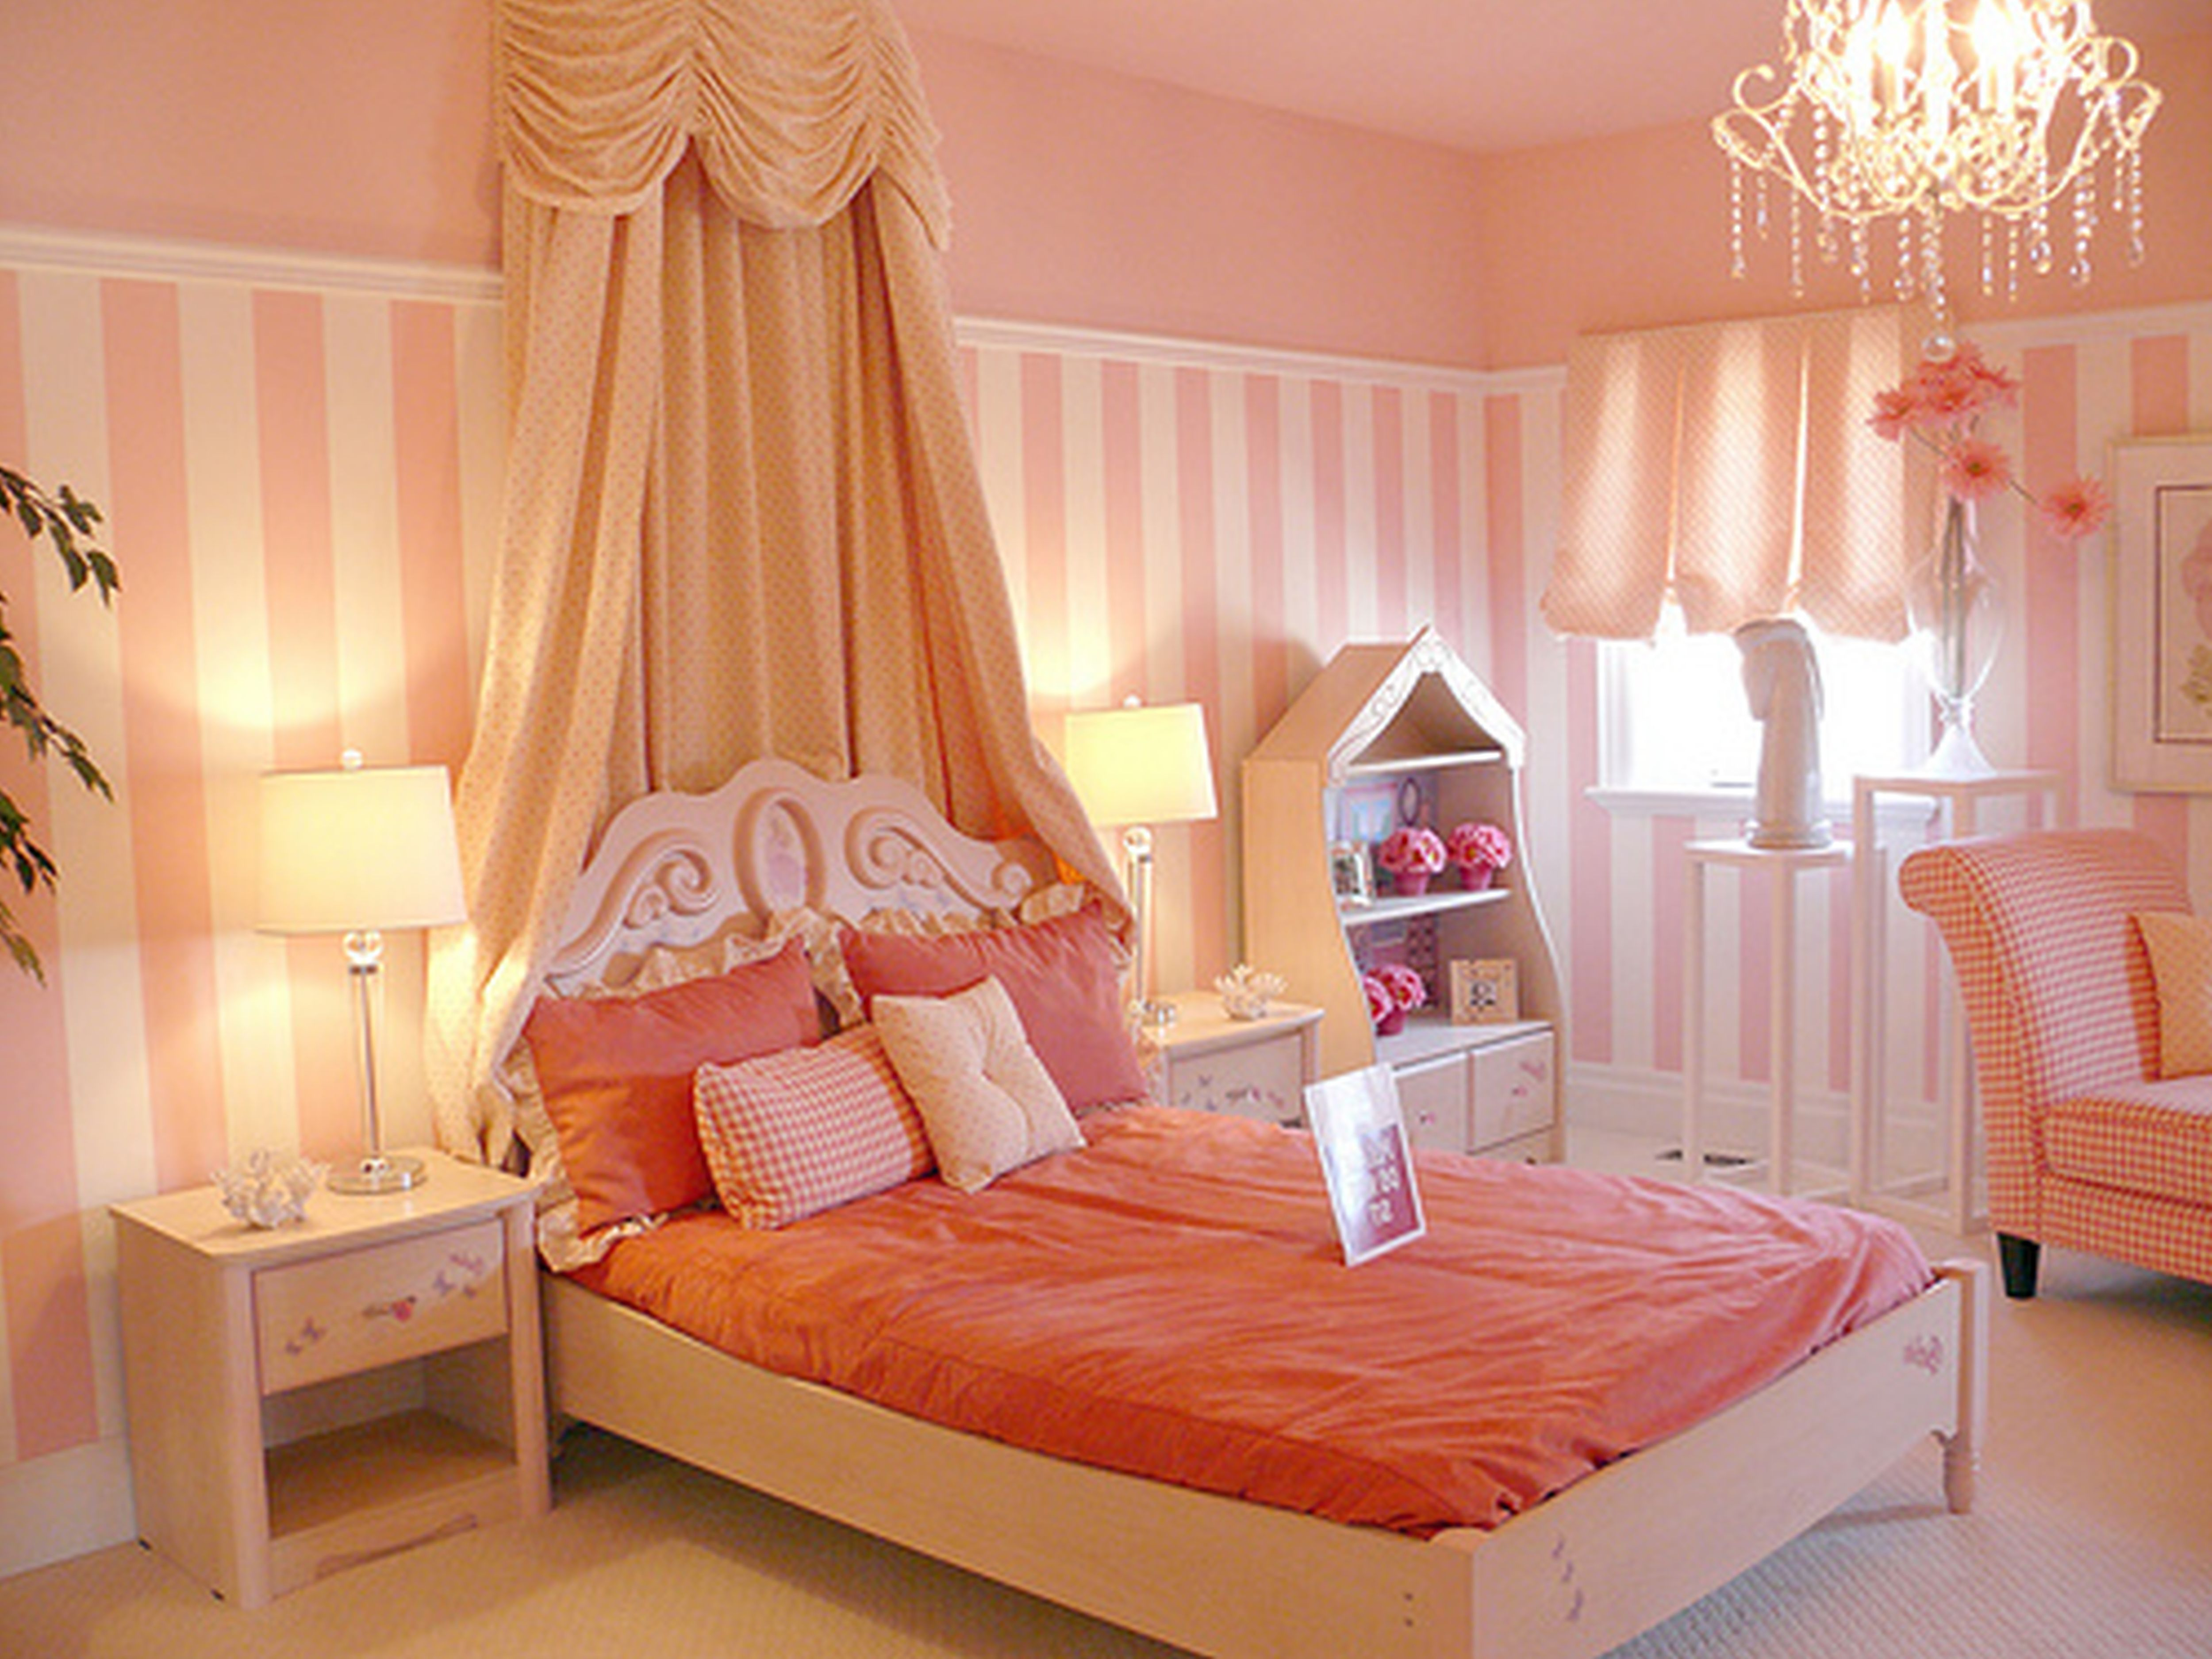 Beauty Teenage Girl Room Colors Home Design Ideas Home Design with measurements 5000 X 3750